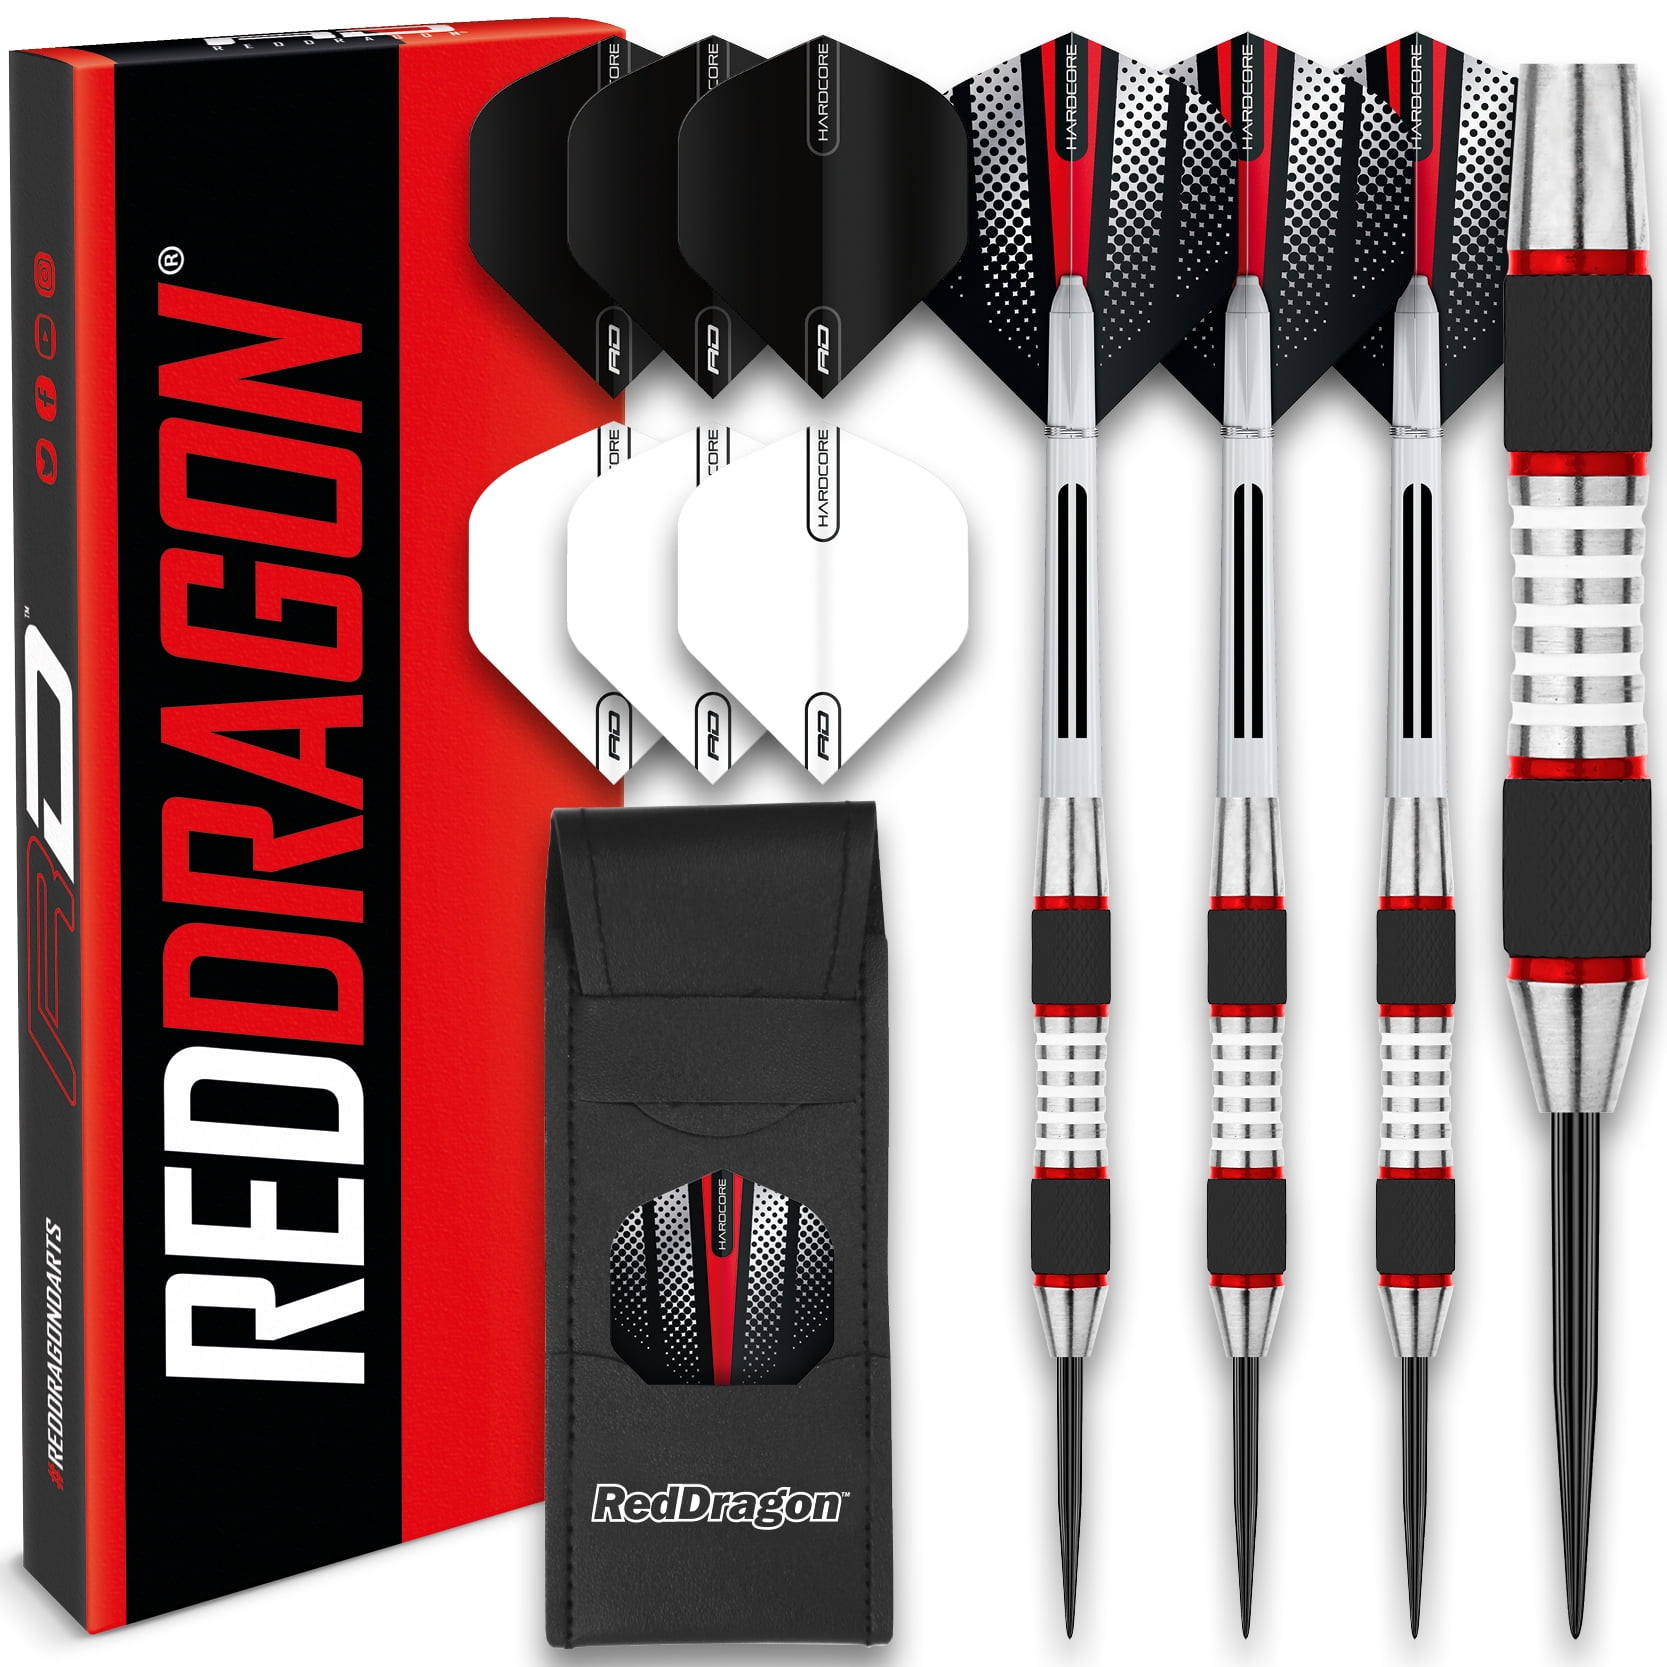 Stems RED DRAGON GT3's Tungsten Professional Darts Set with Flights And Nitrotech Shafts 